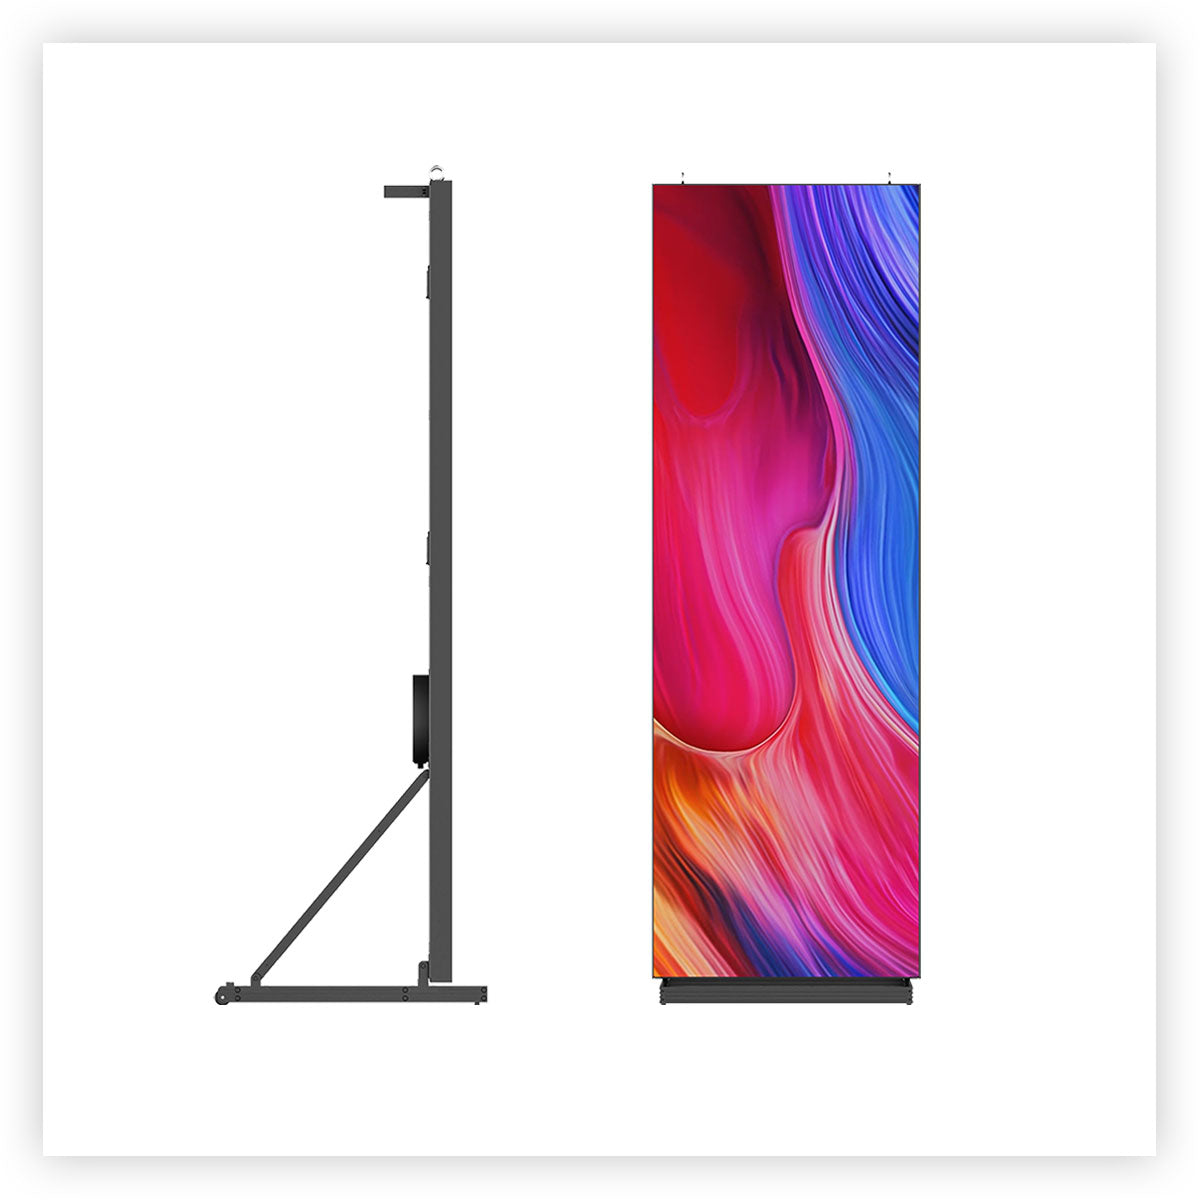 AdSpire Outdoor LED Poster 25.2"x75.6" P3.076mm